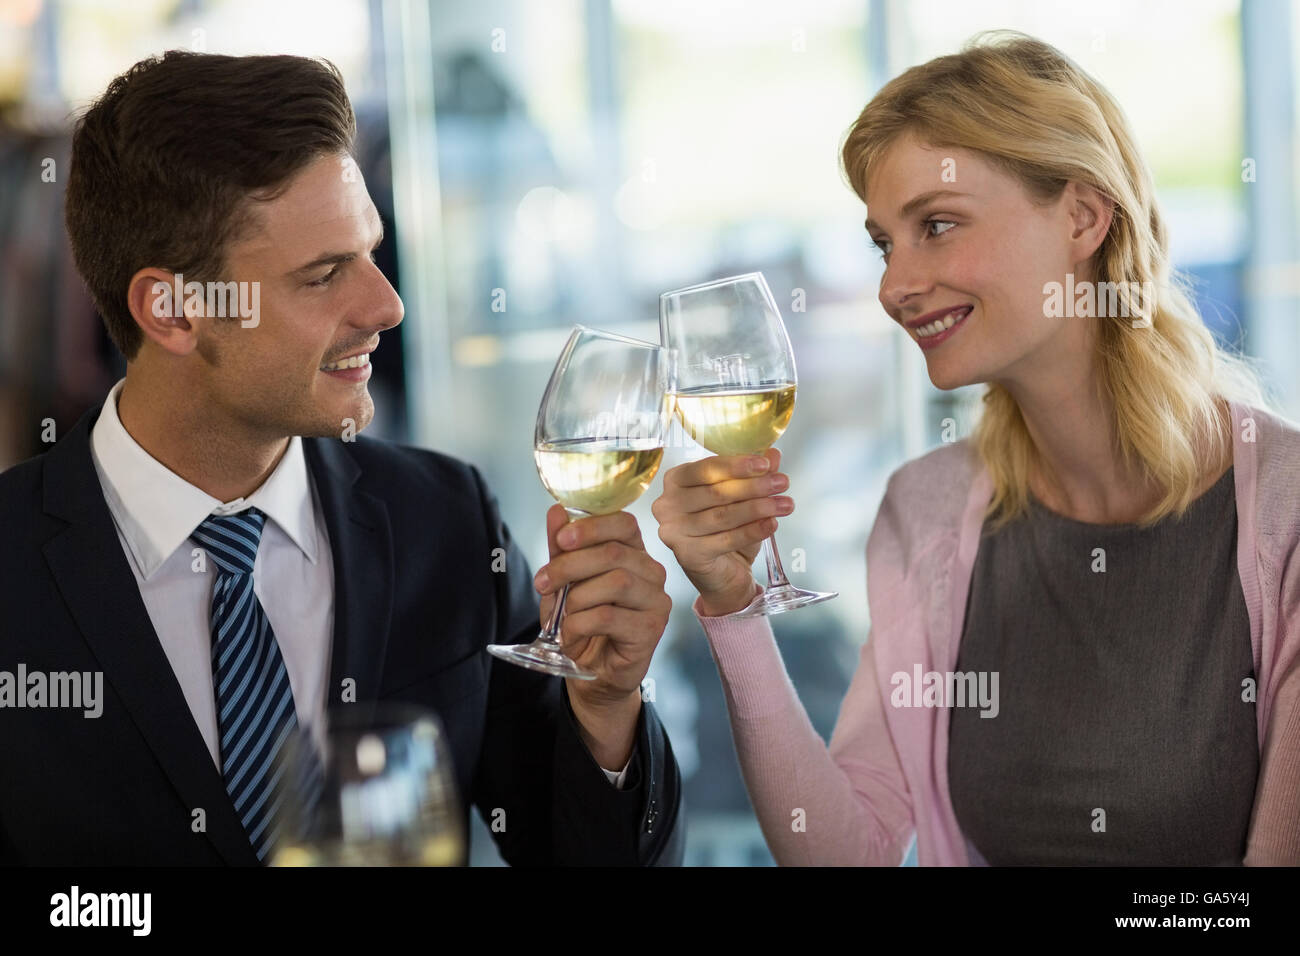 Smiling business colleagues toasting beer glass Stock Photo